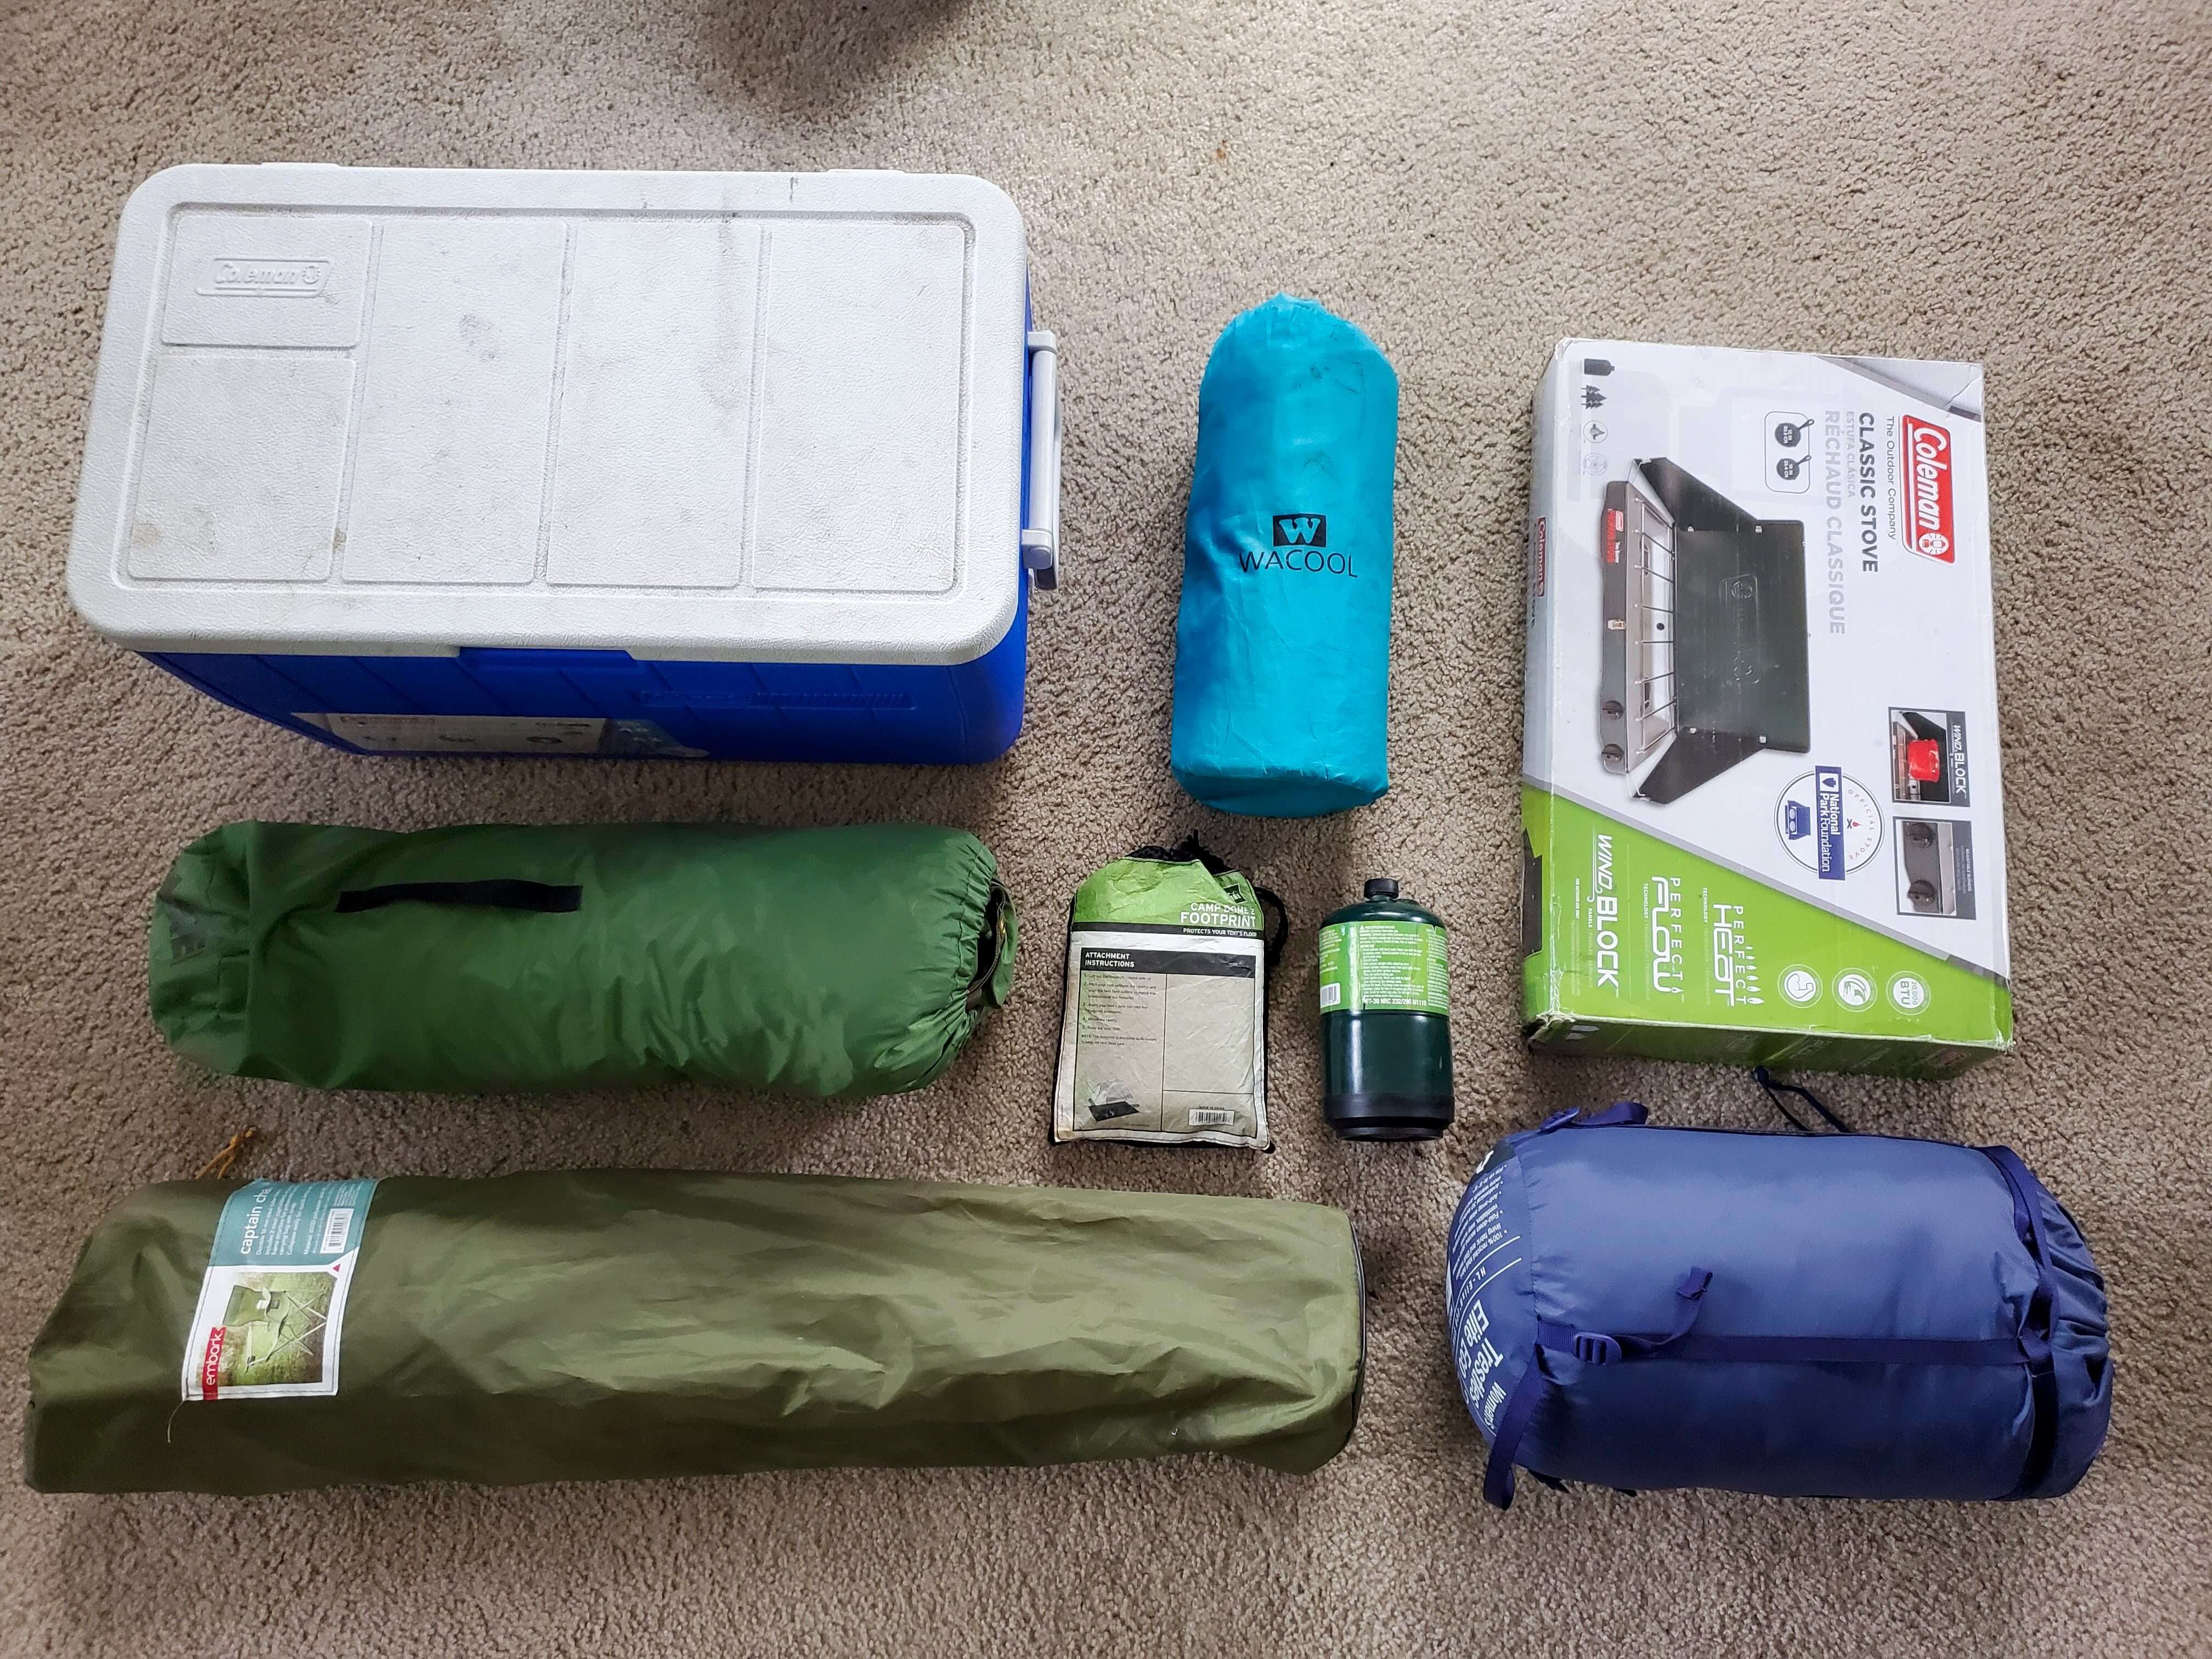 Camping gear laid out on the floor